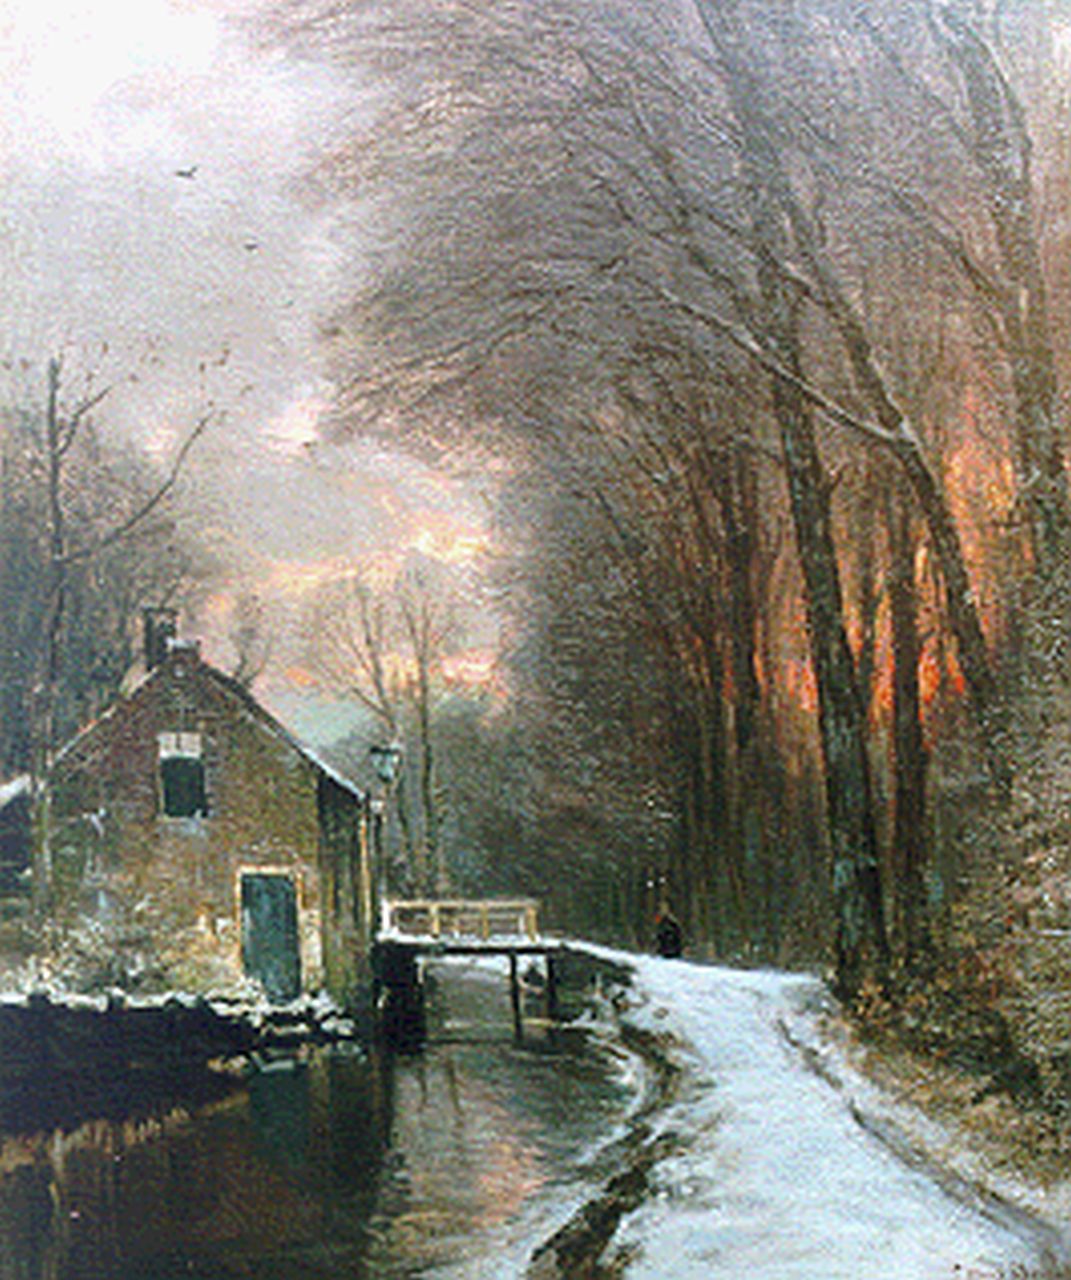 Apol L.F.H.  | Lodewijk Franciscus Hendrik 'Louis' Apol, A colourful sunset in winter, oil on canvas 61.0 x 51.0 cm, signed l.r.